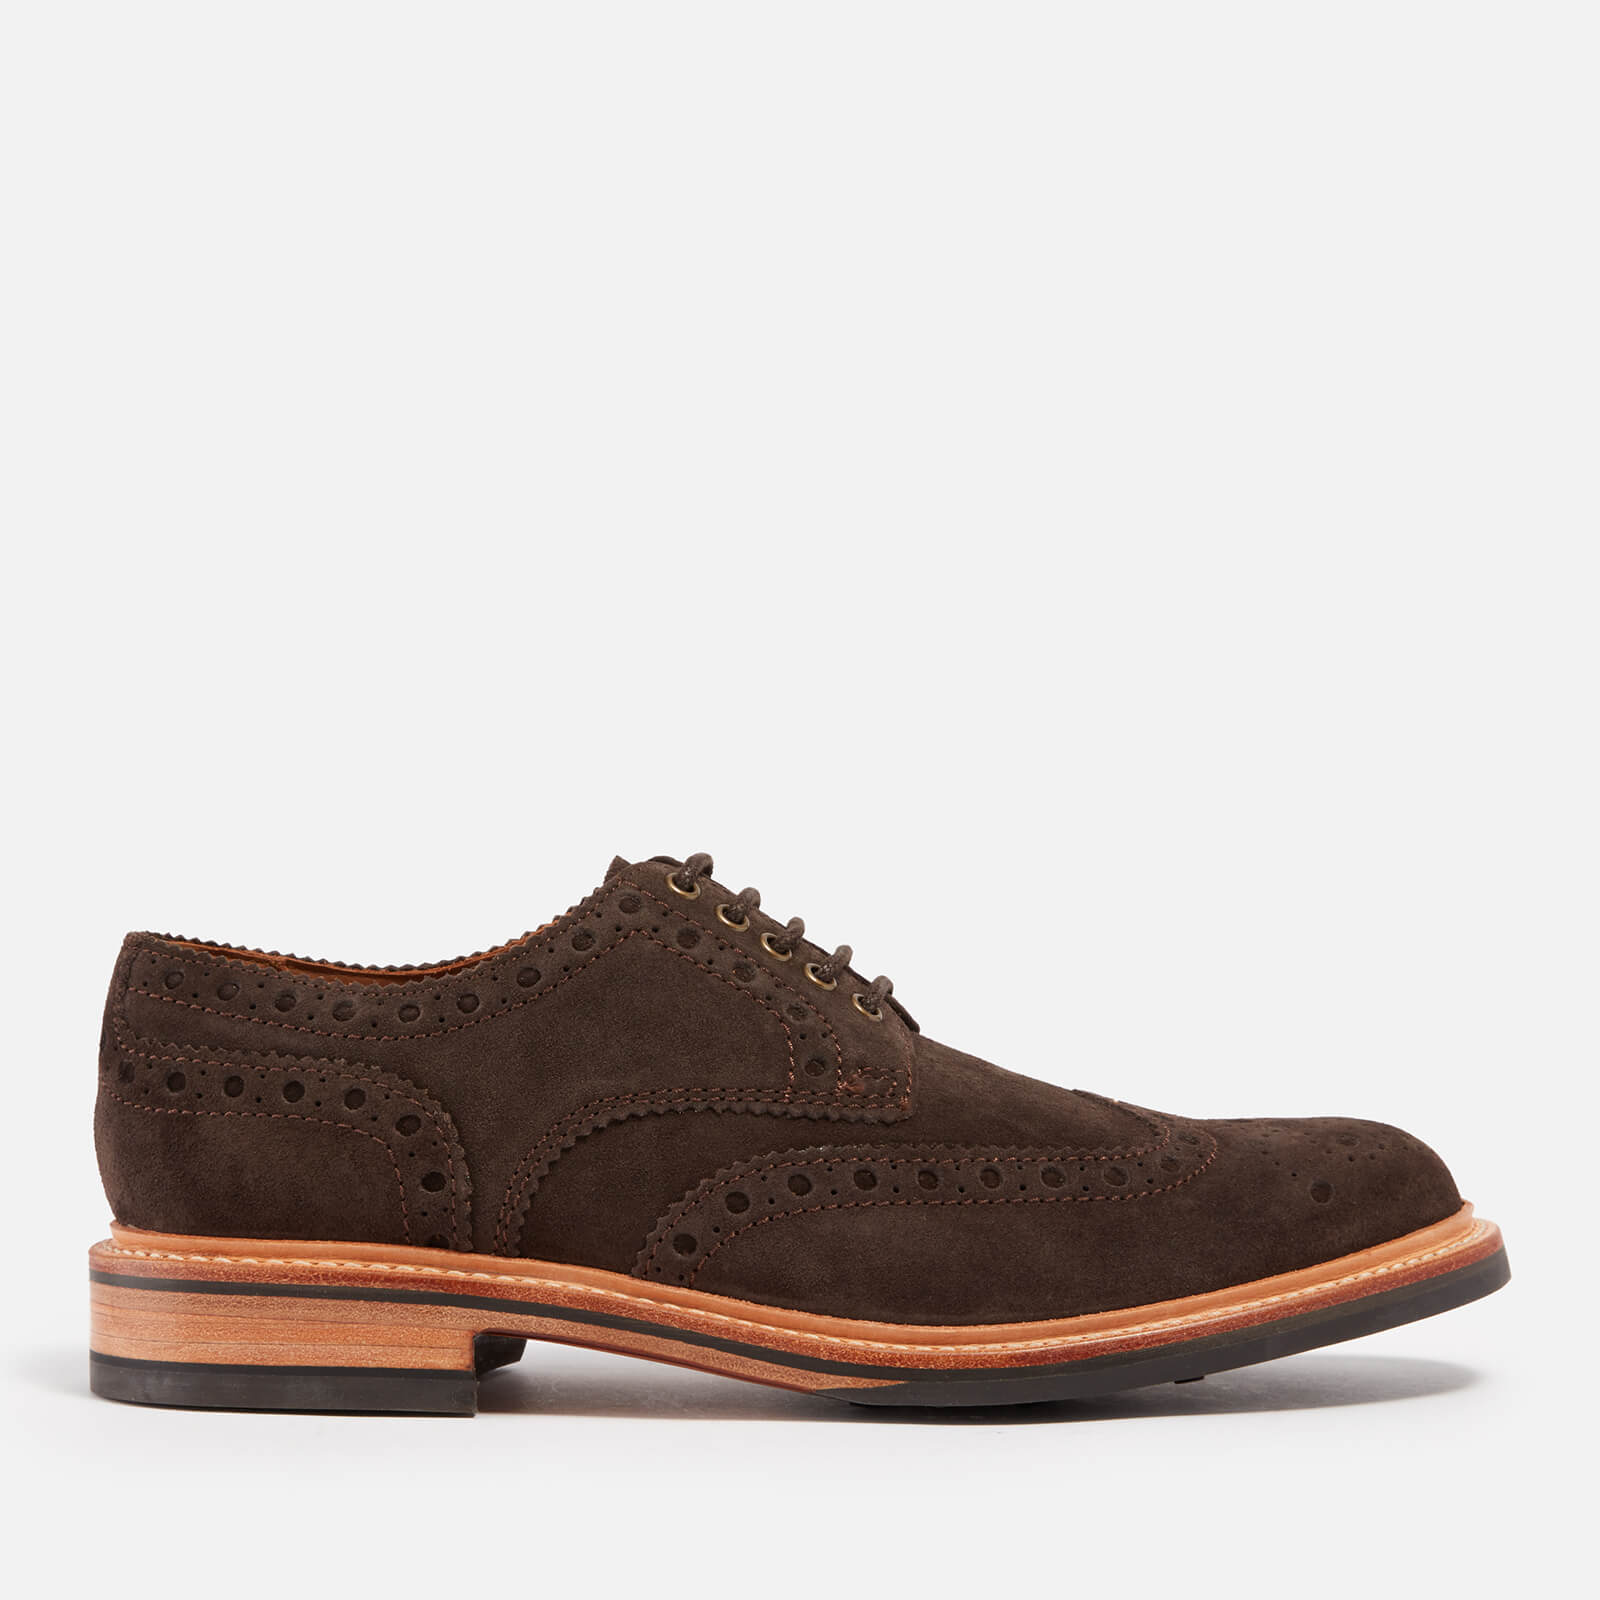 Grenson Archie Suede Brogues - UK 7